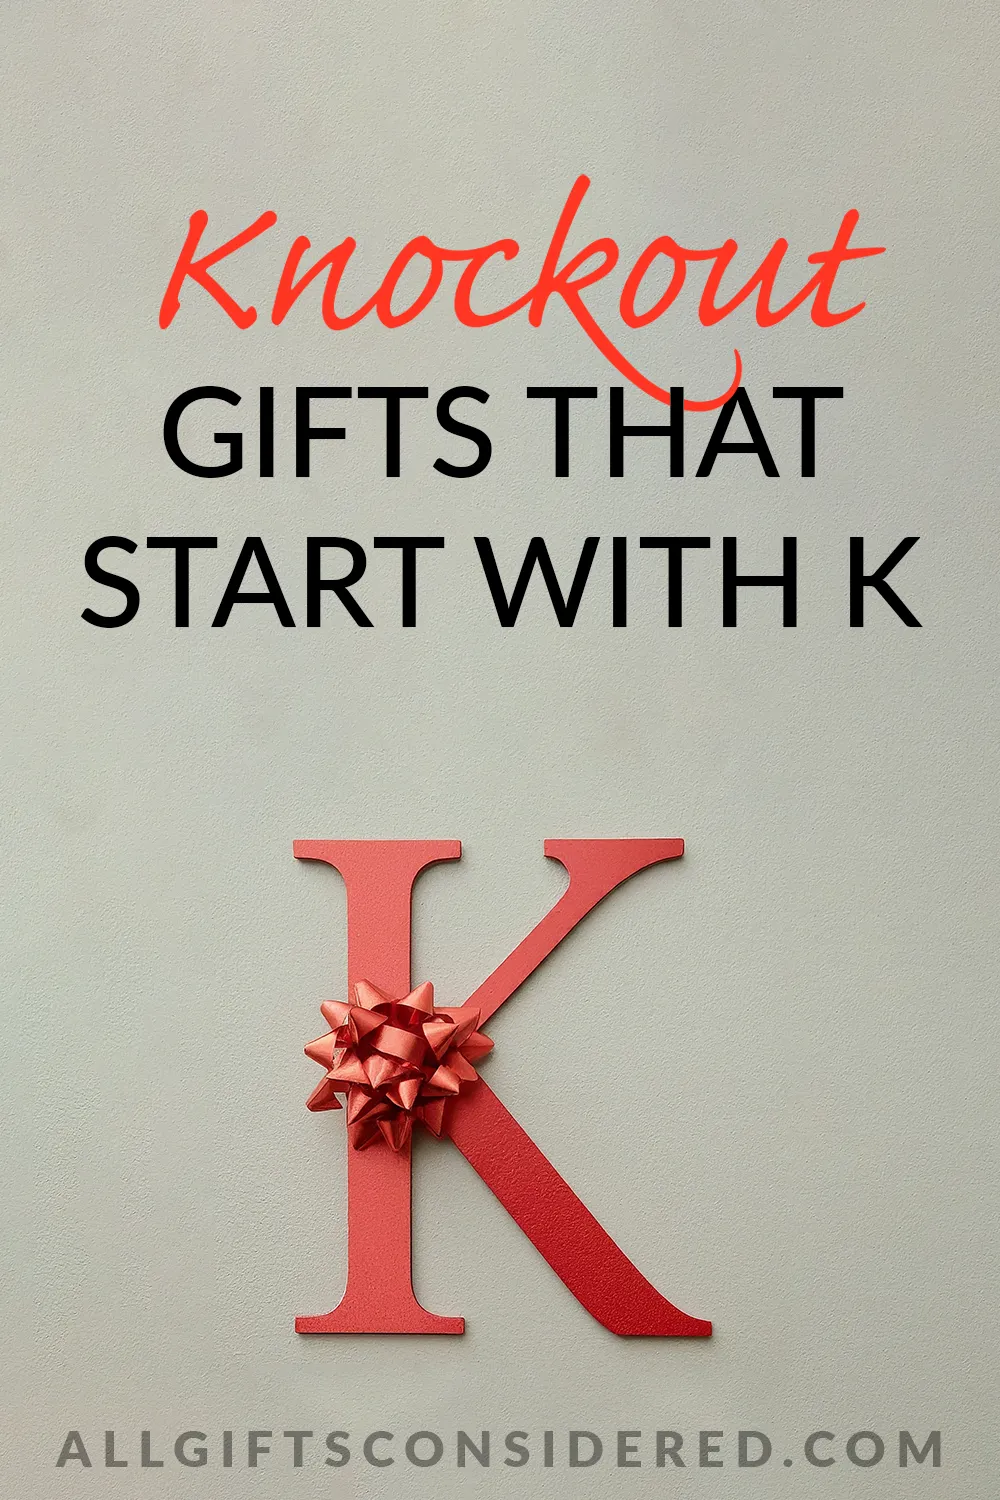 Gifts that start with the letter k